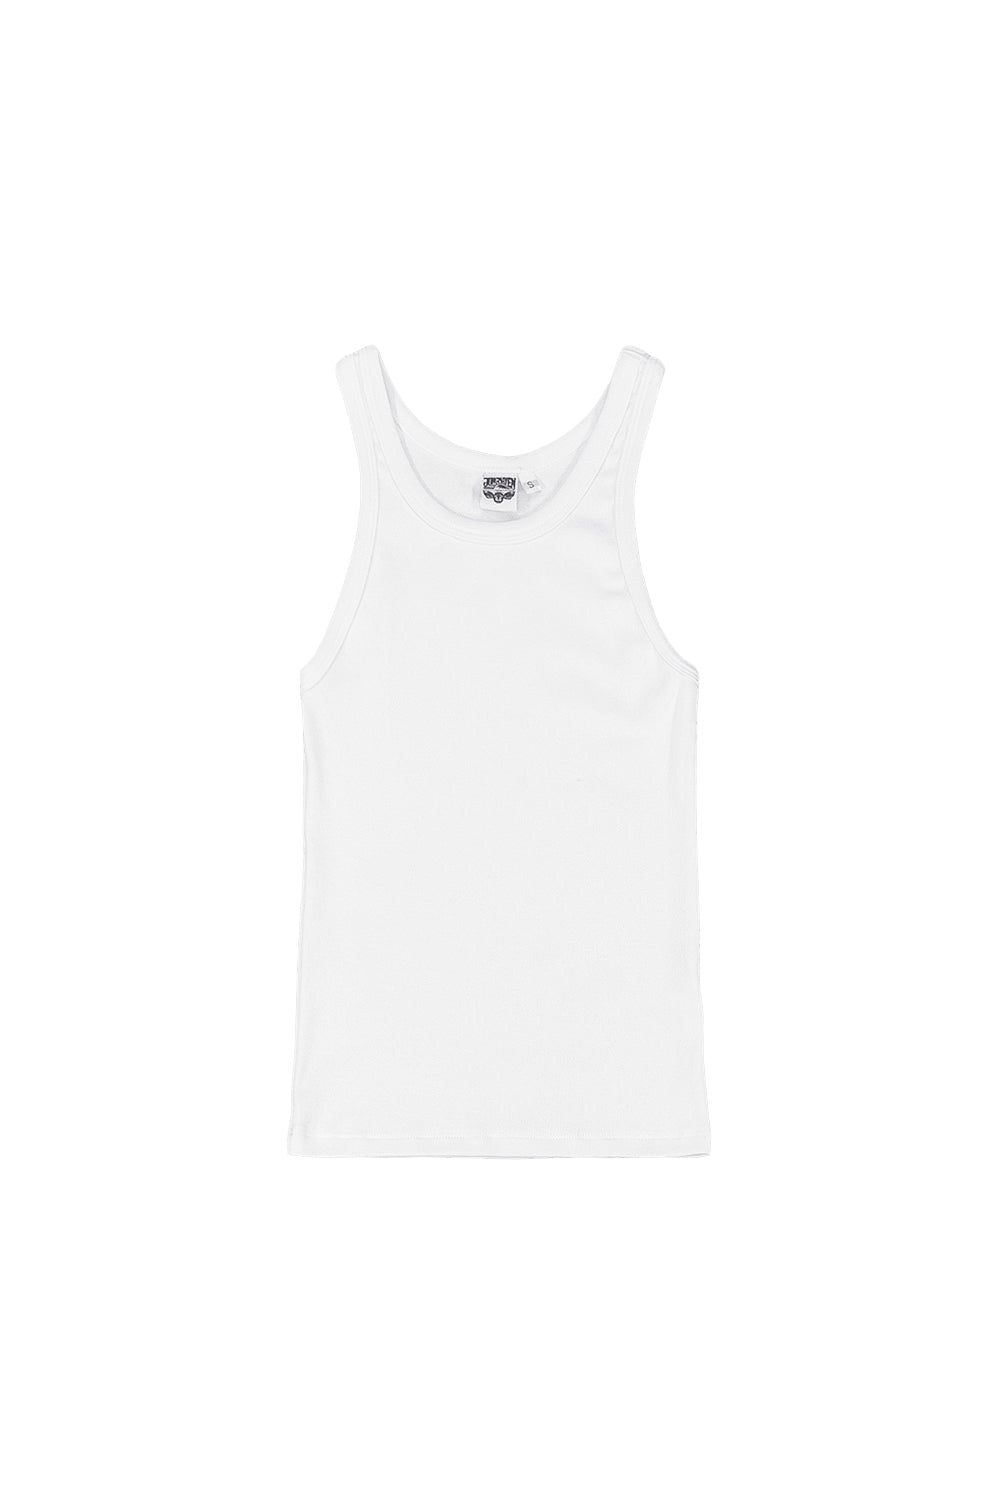 Alta Tank | Jungmaven Hemp Clothing & Accessories / Color: Washed White